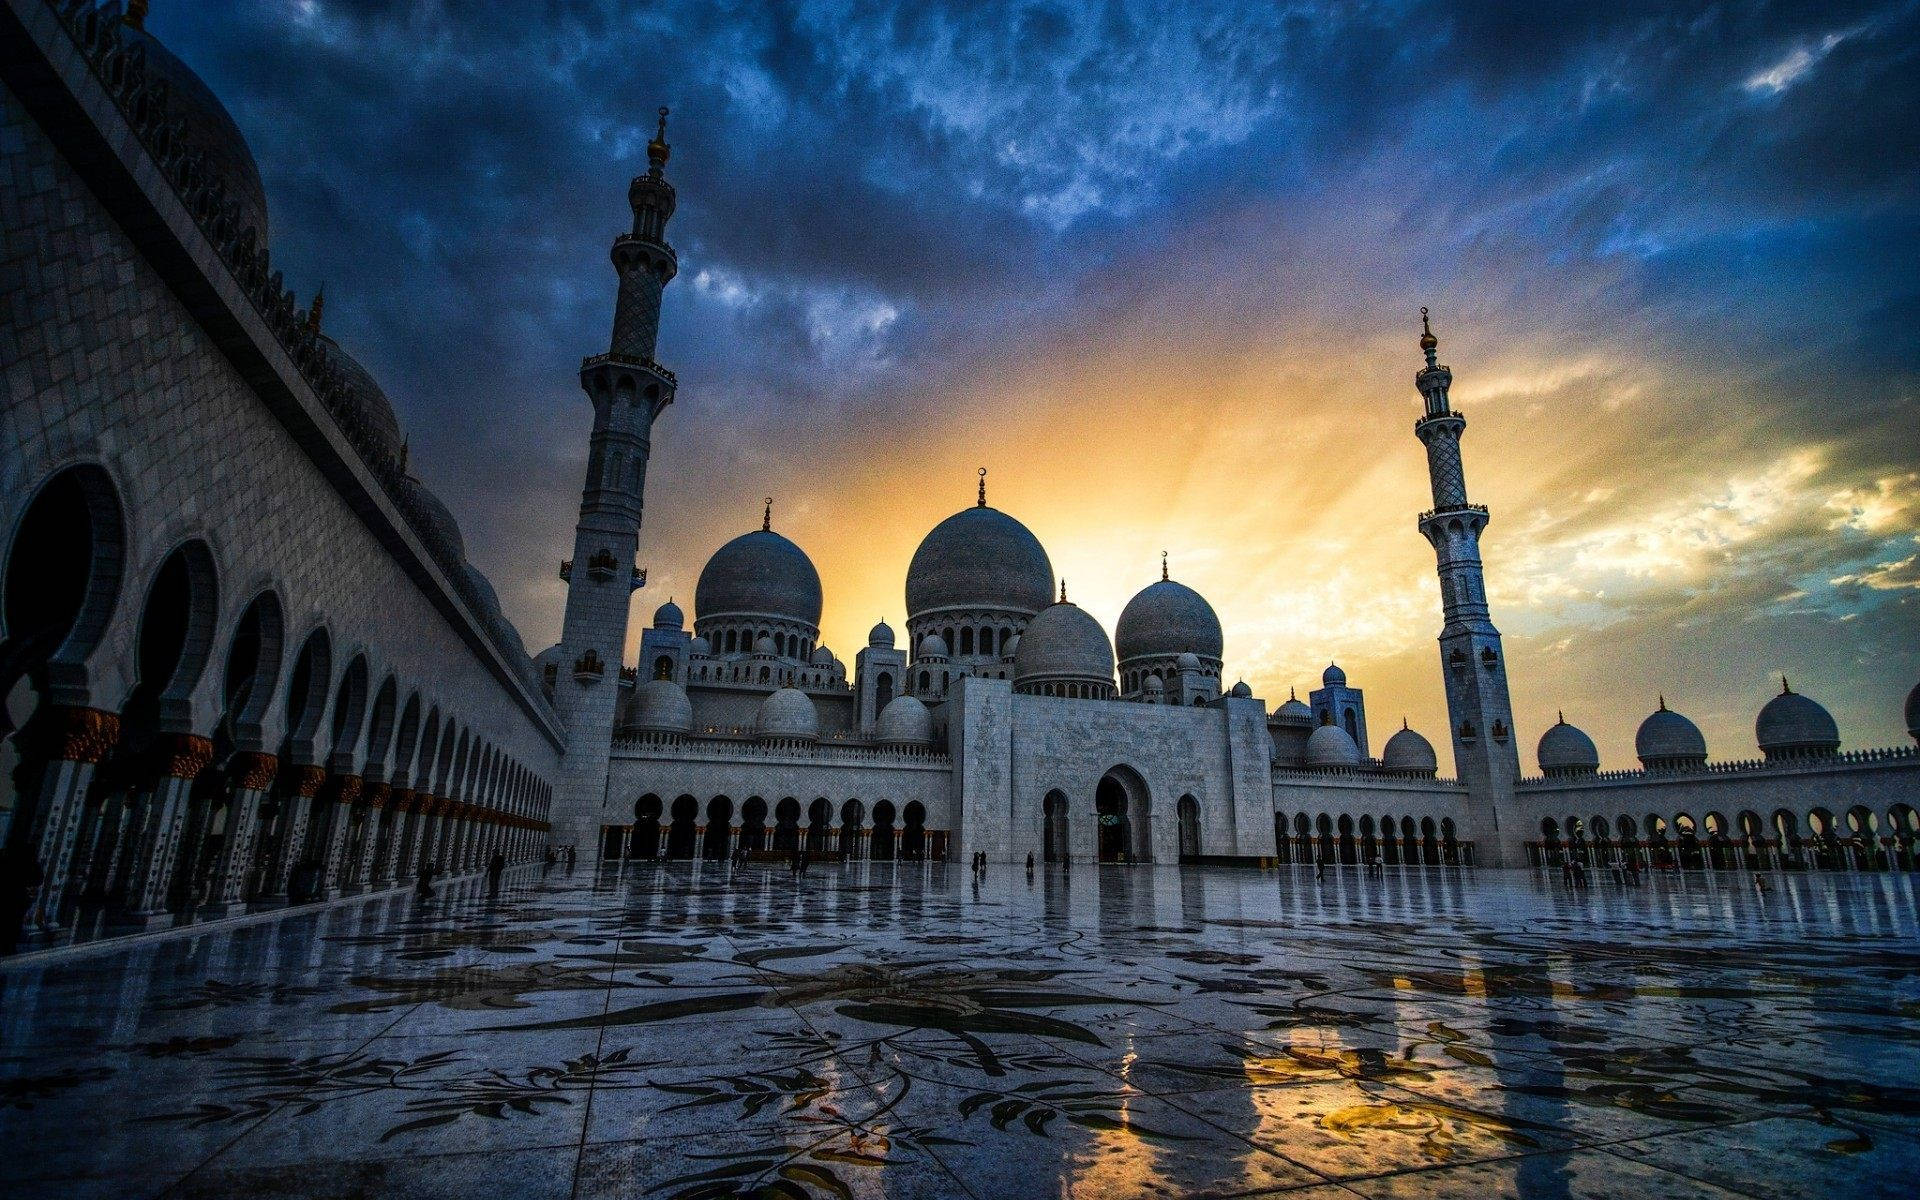 Download Islamic Mosque At Sunset Wallpaper | Wallpapers.com